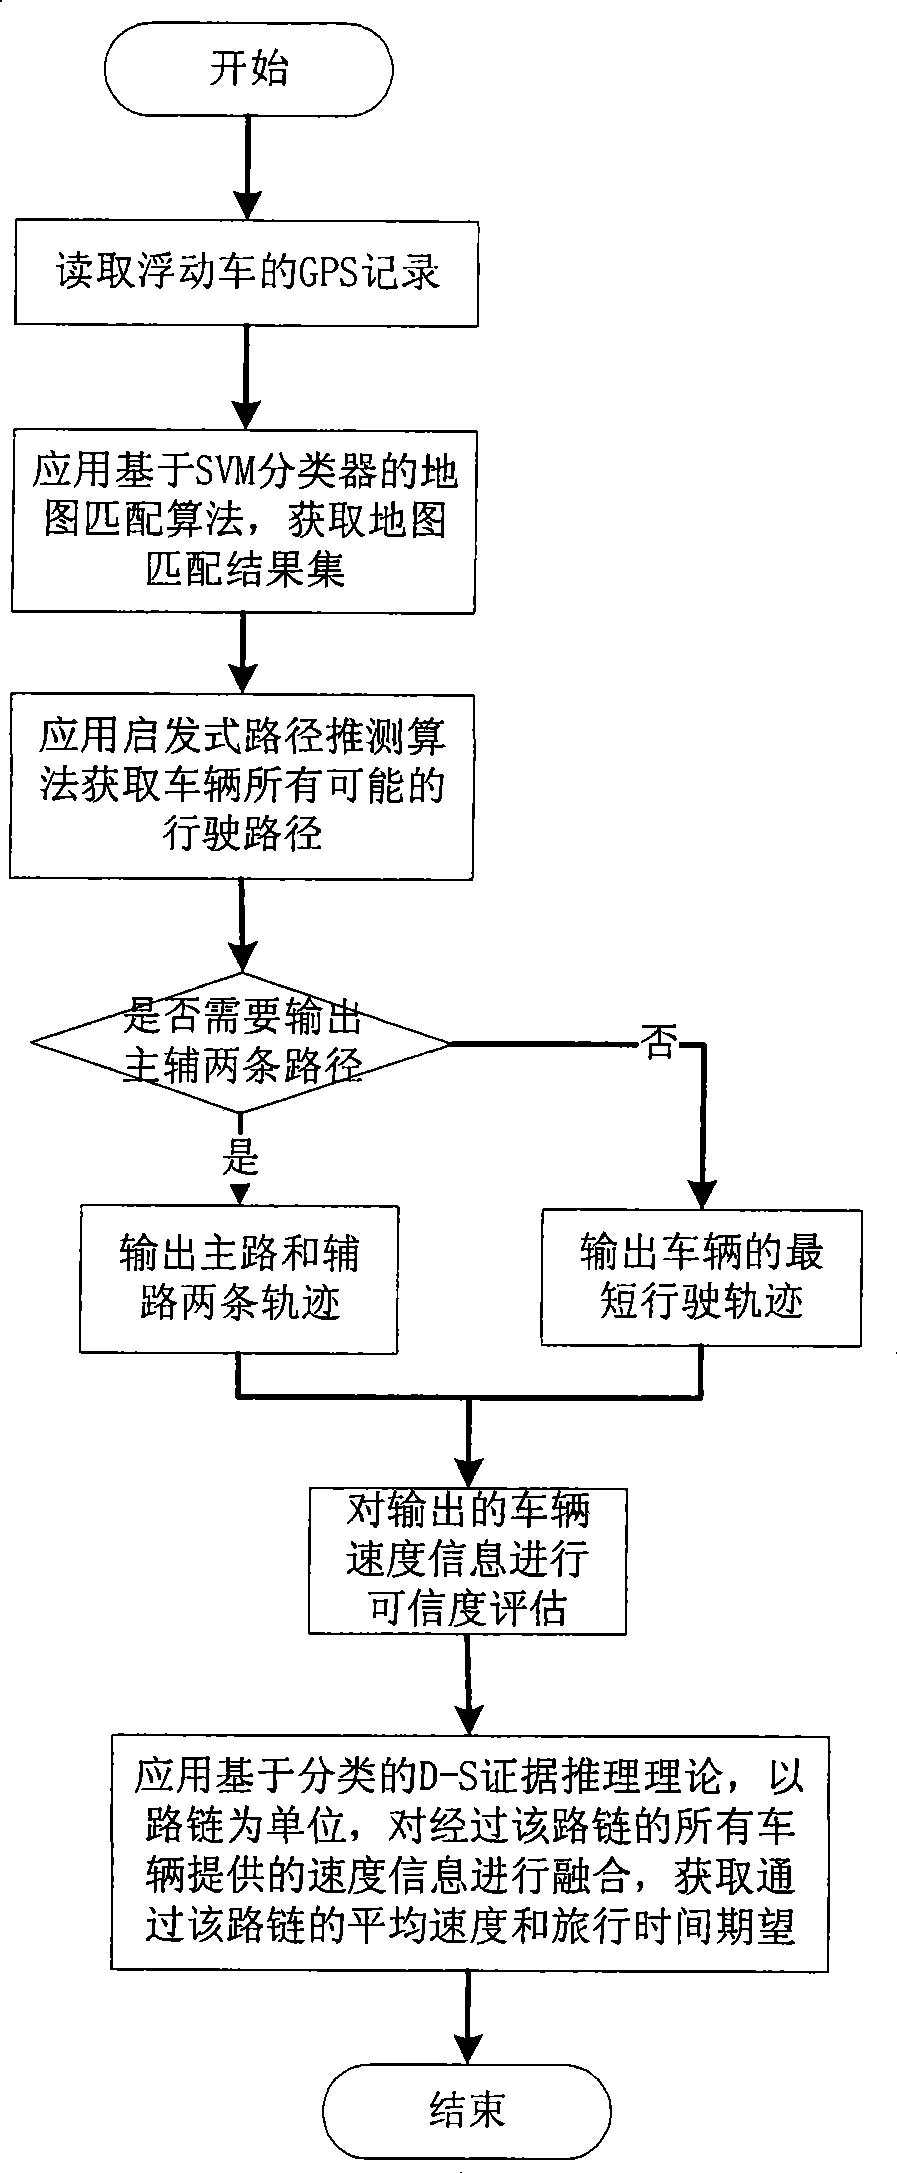 Floating vehicle information processing method under parallel road network structure